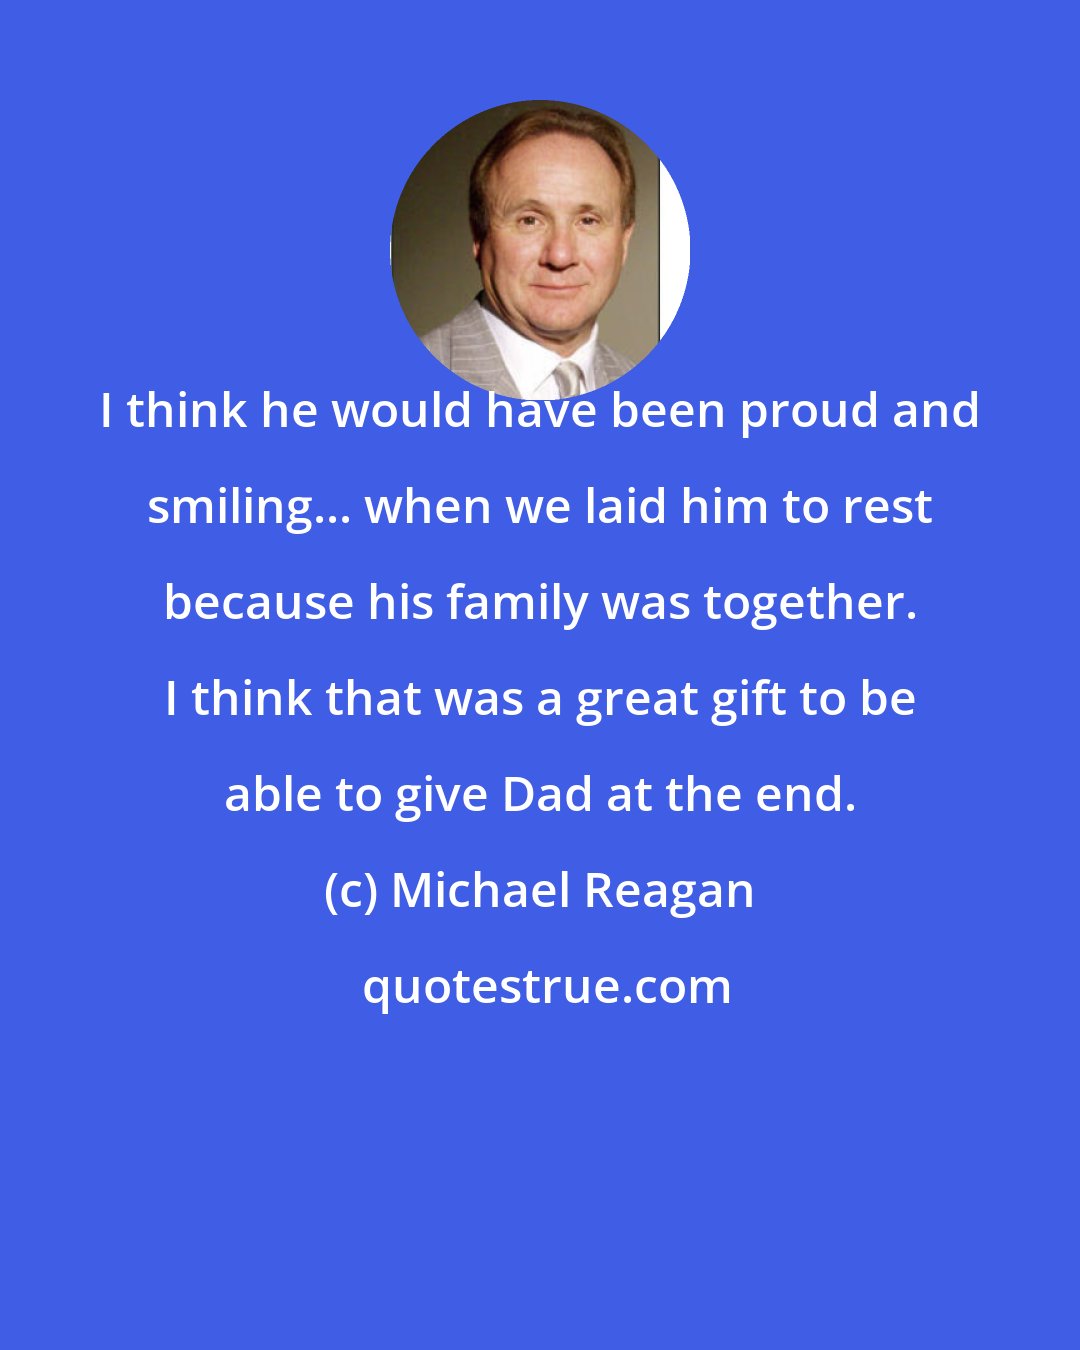 Michael Reagan: I think he would have been proud and smiling... when we laid him to rest because his family was together. I think that was a great gift to be able to give Dad at the end.